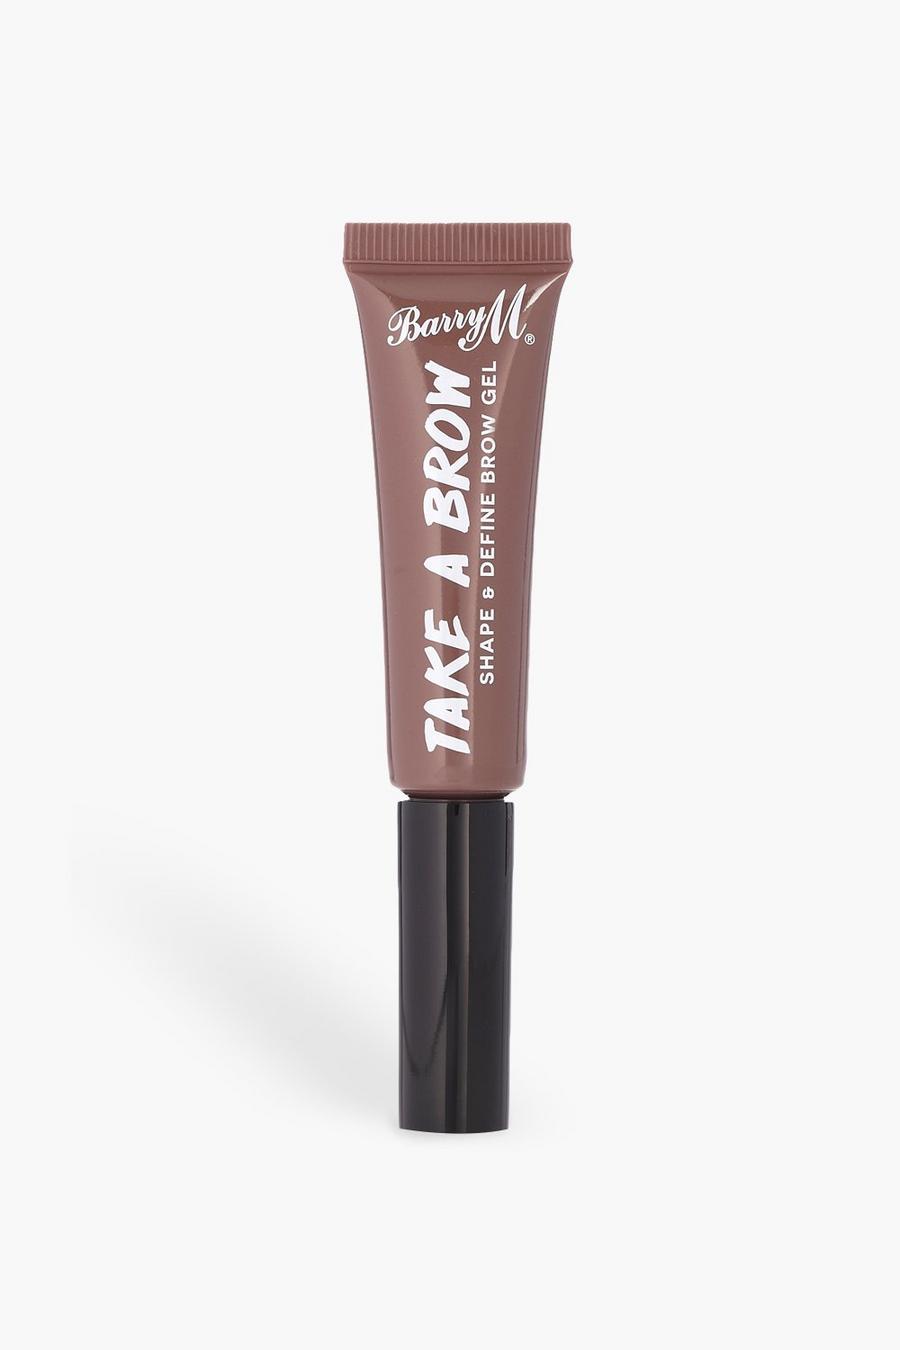 Barry M Take A Brow Augenbrauengel, Braun image number 1